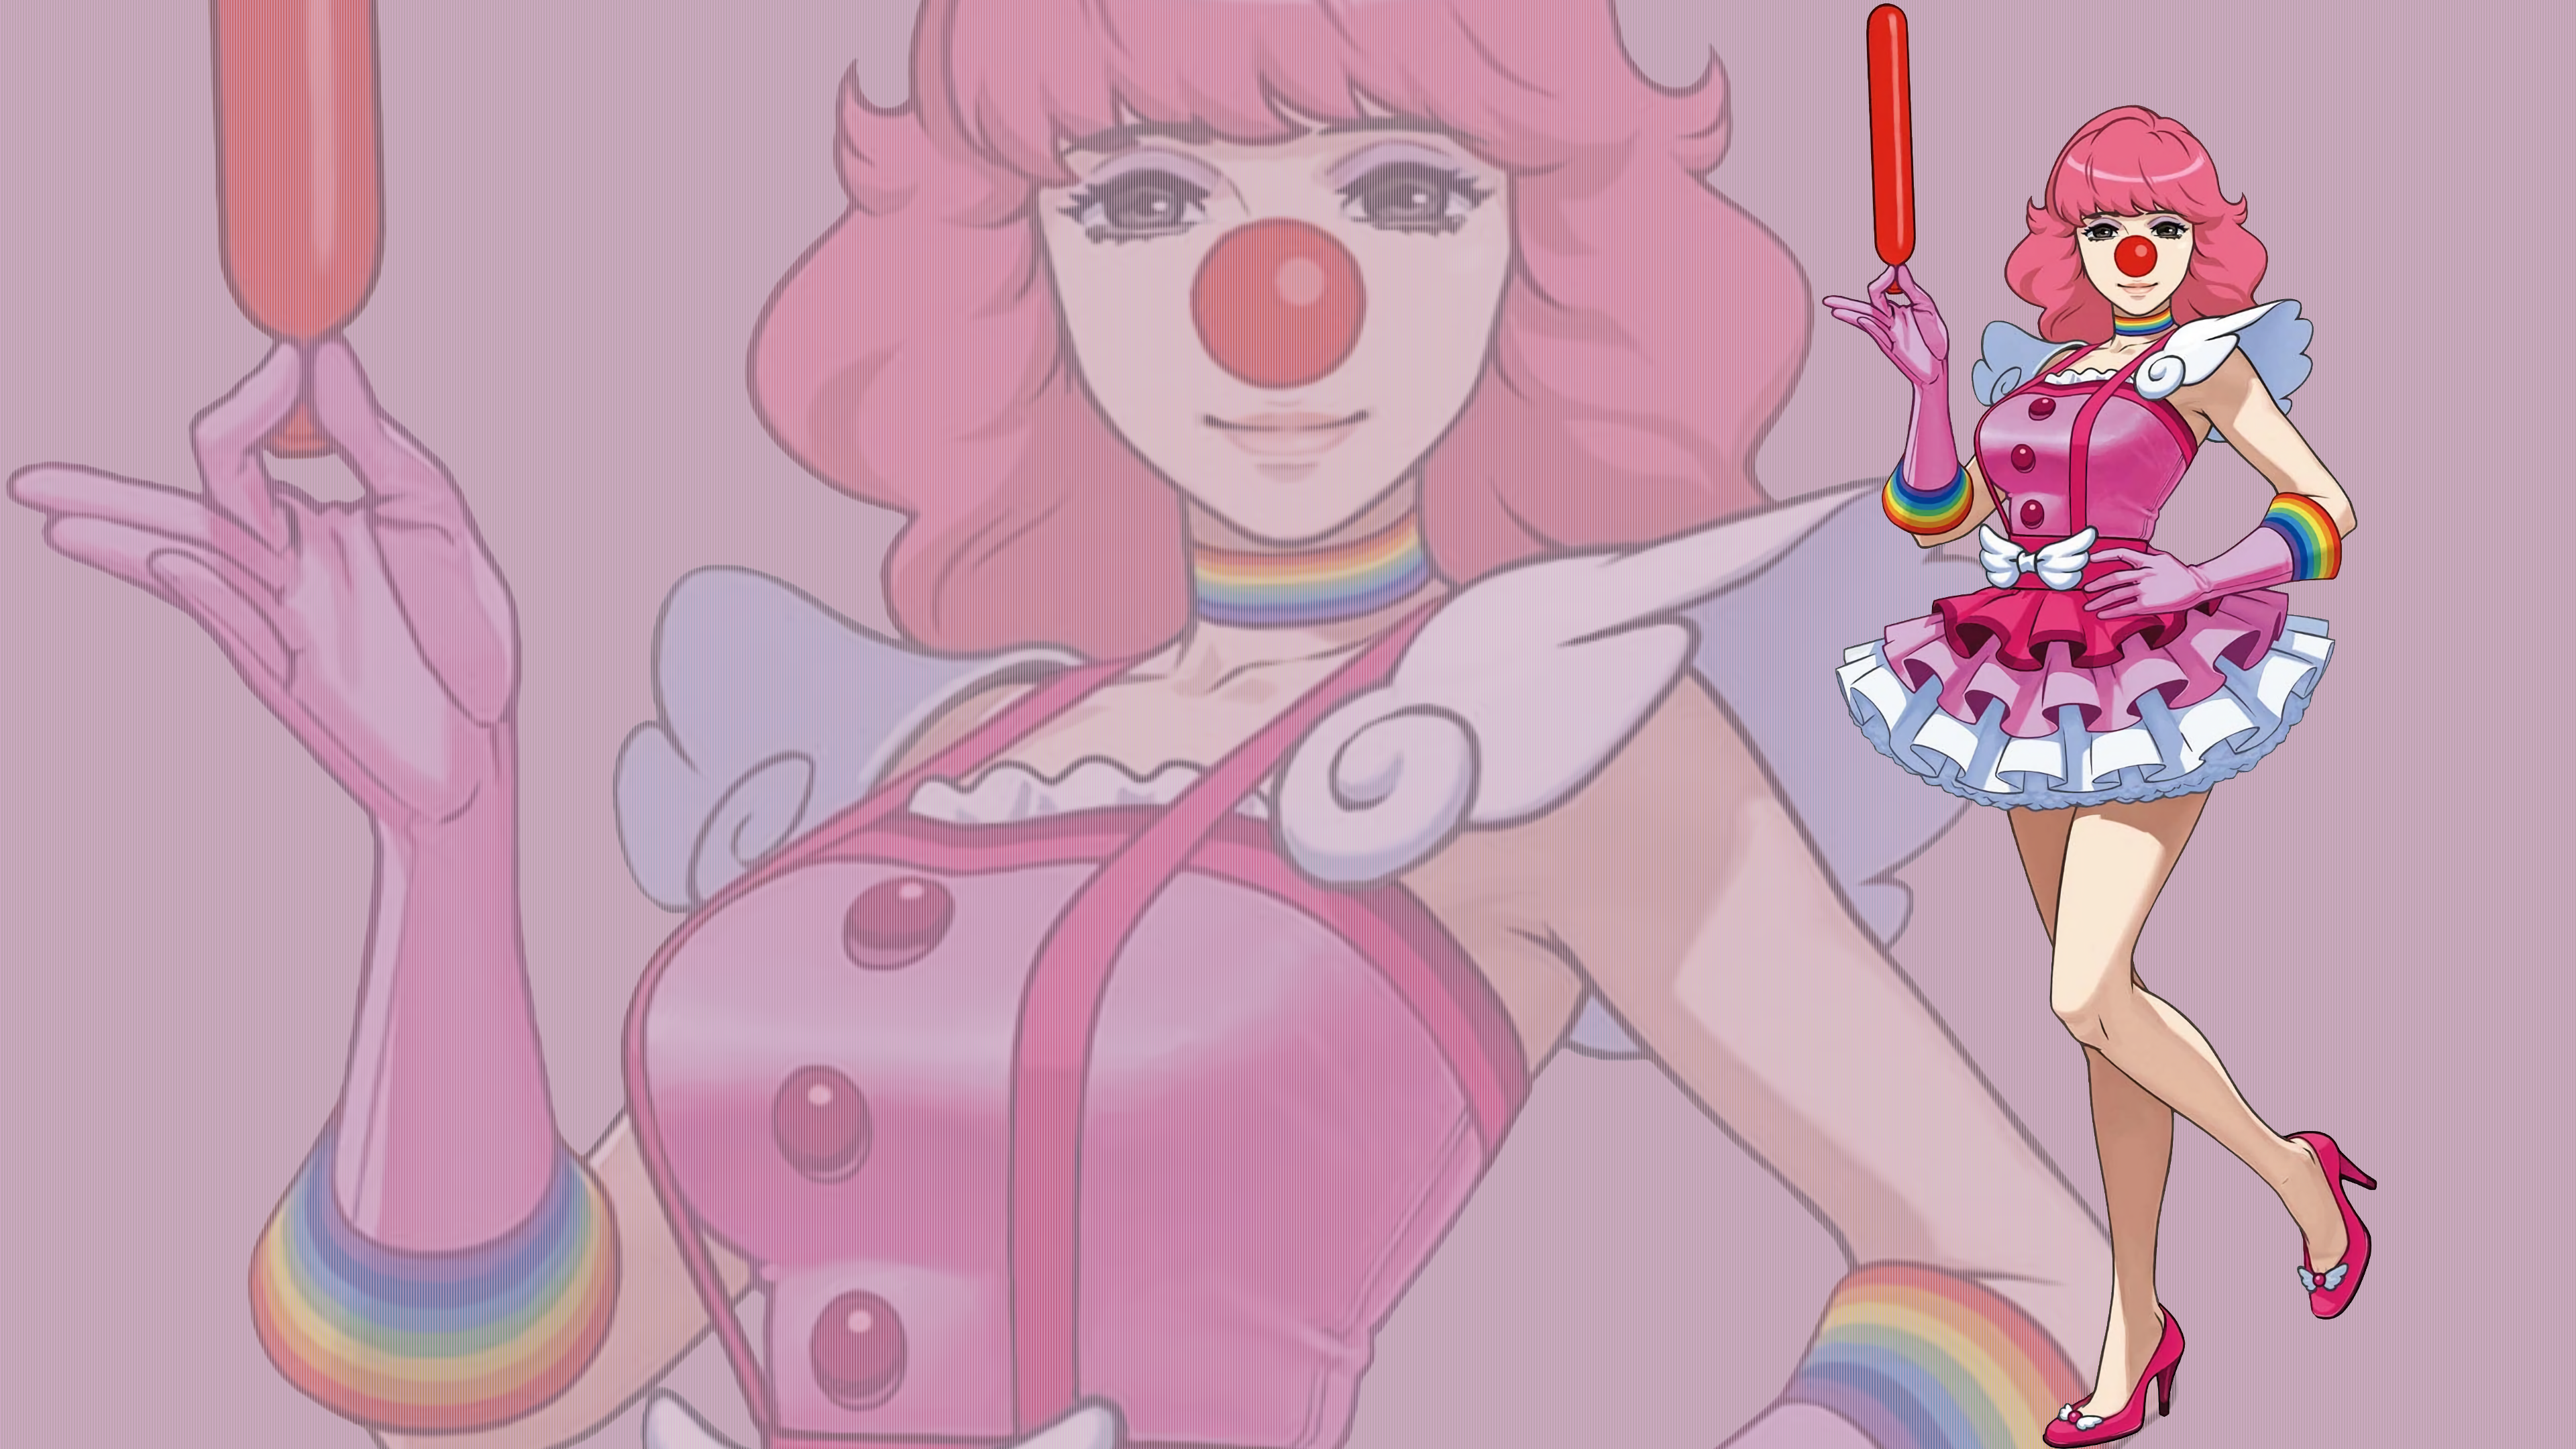 Ace Attorney Clown Red Nose Suspenders Frill Dress Shoulder Pads Makeup Eyeshadow Gloves Rainbow Clo 3840x2160